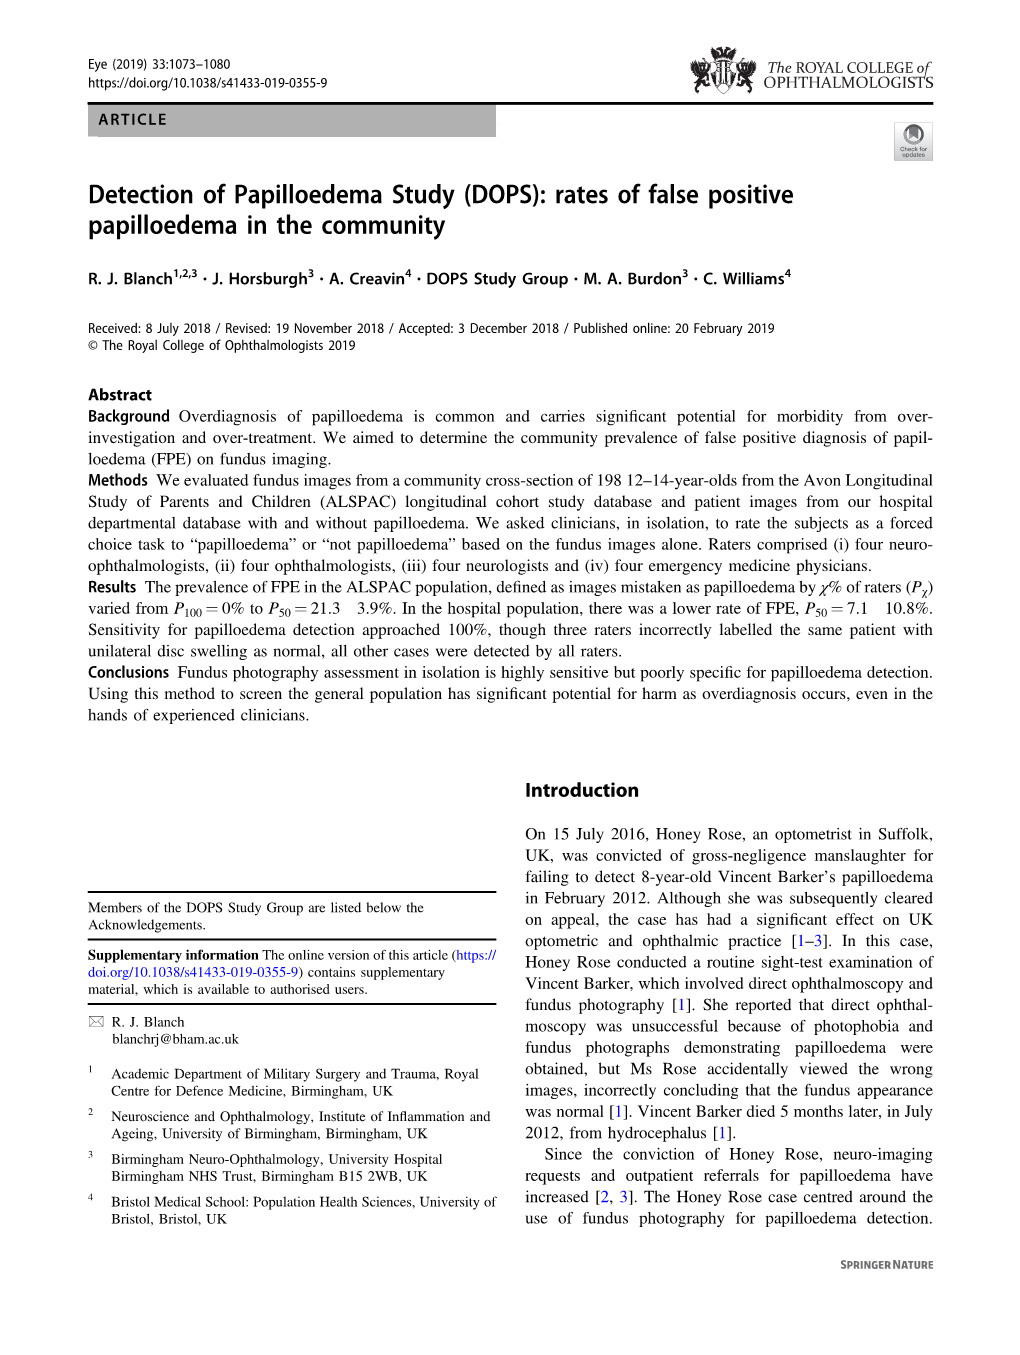 (DOPS): Rates of False Positive Papilloedema in the Community